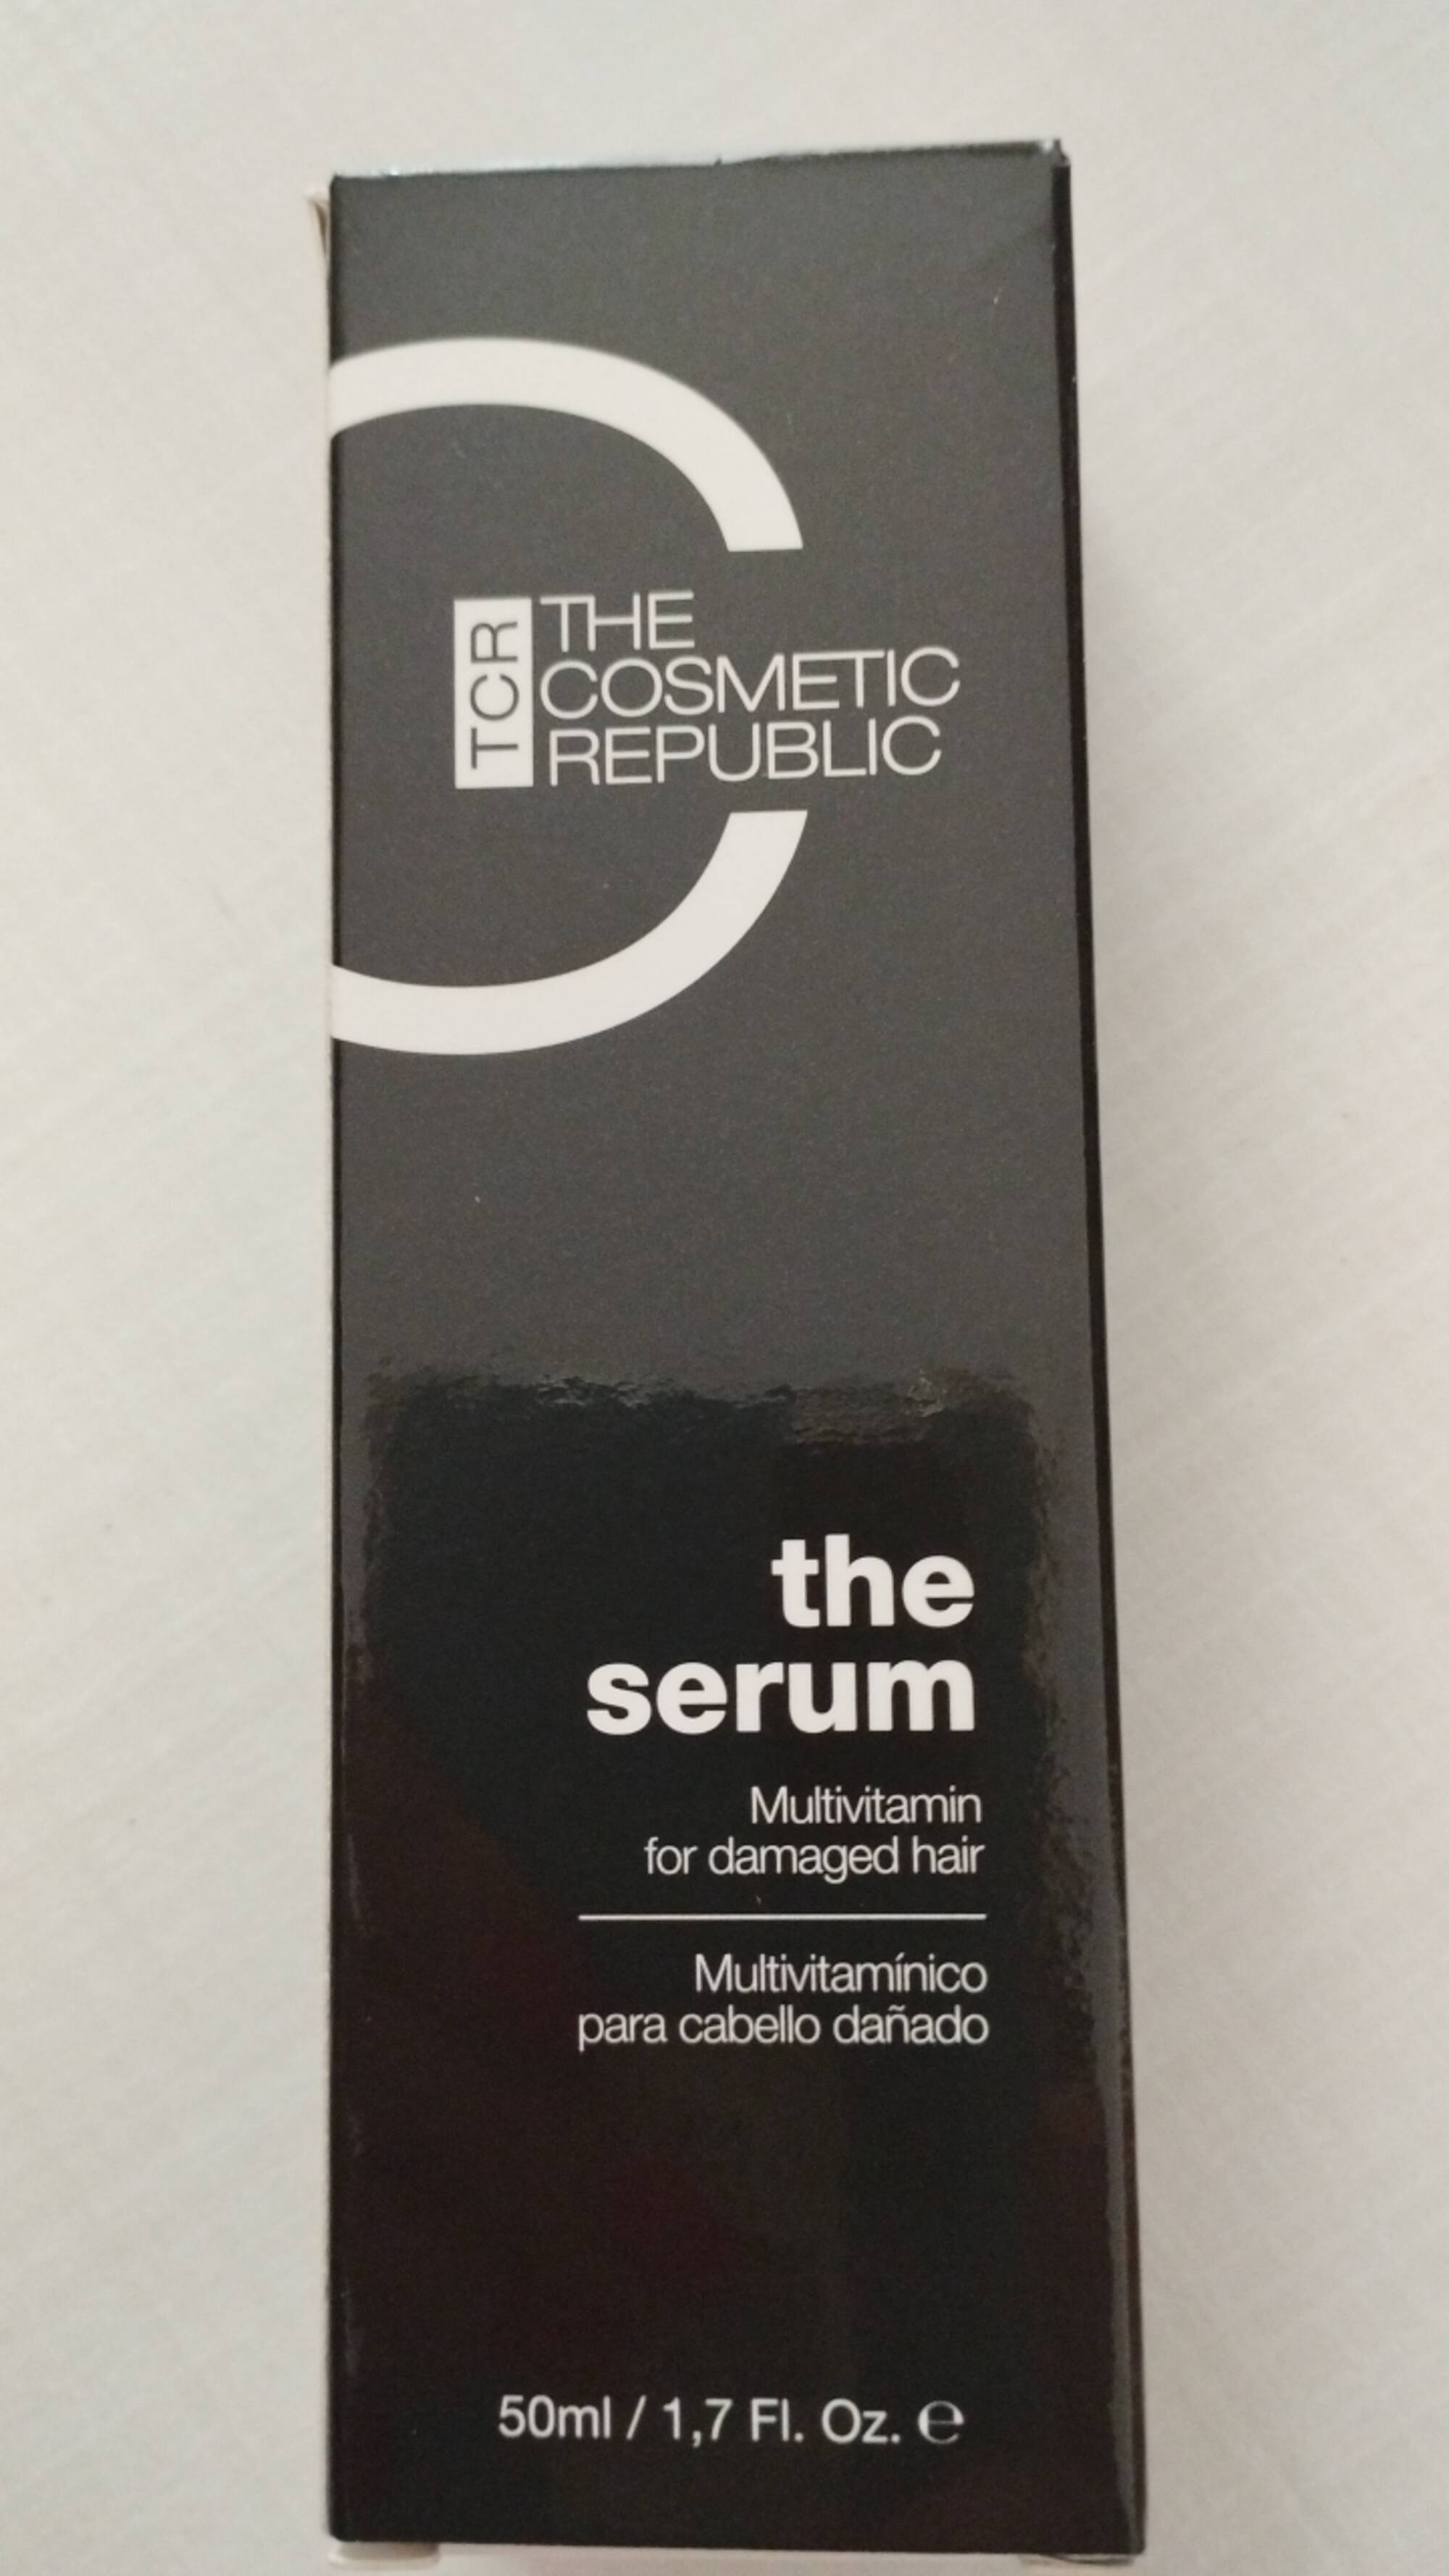 THE COSMETIC REPUBLIC - The serum the multivitamin for damaged hair